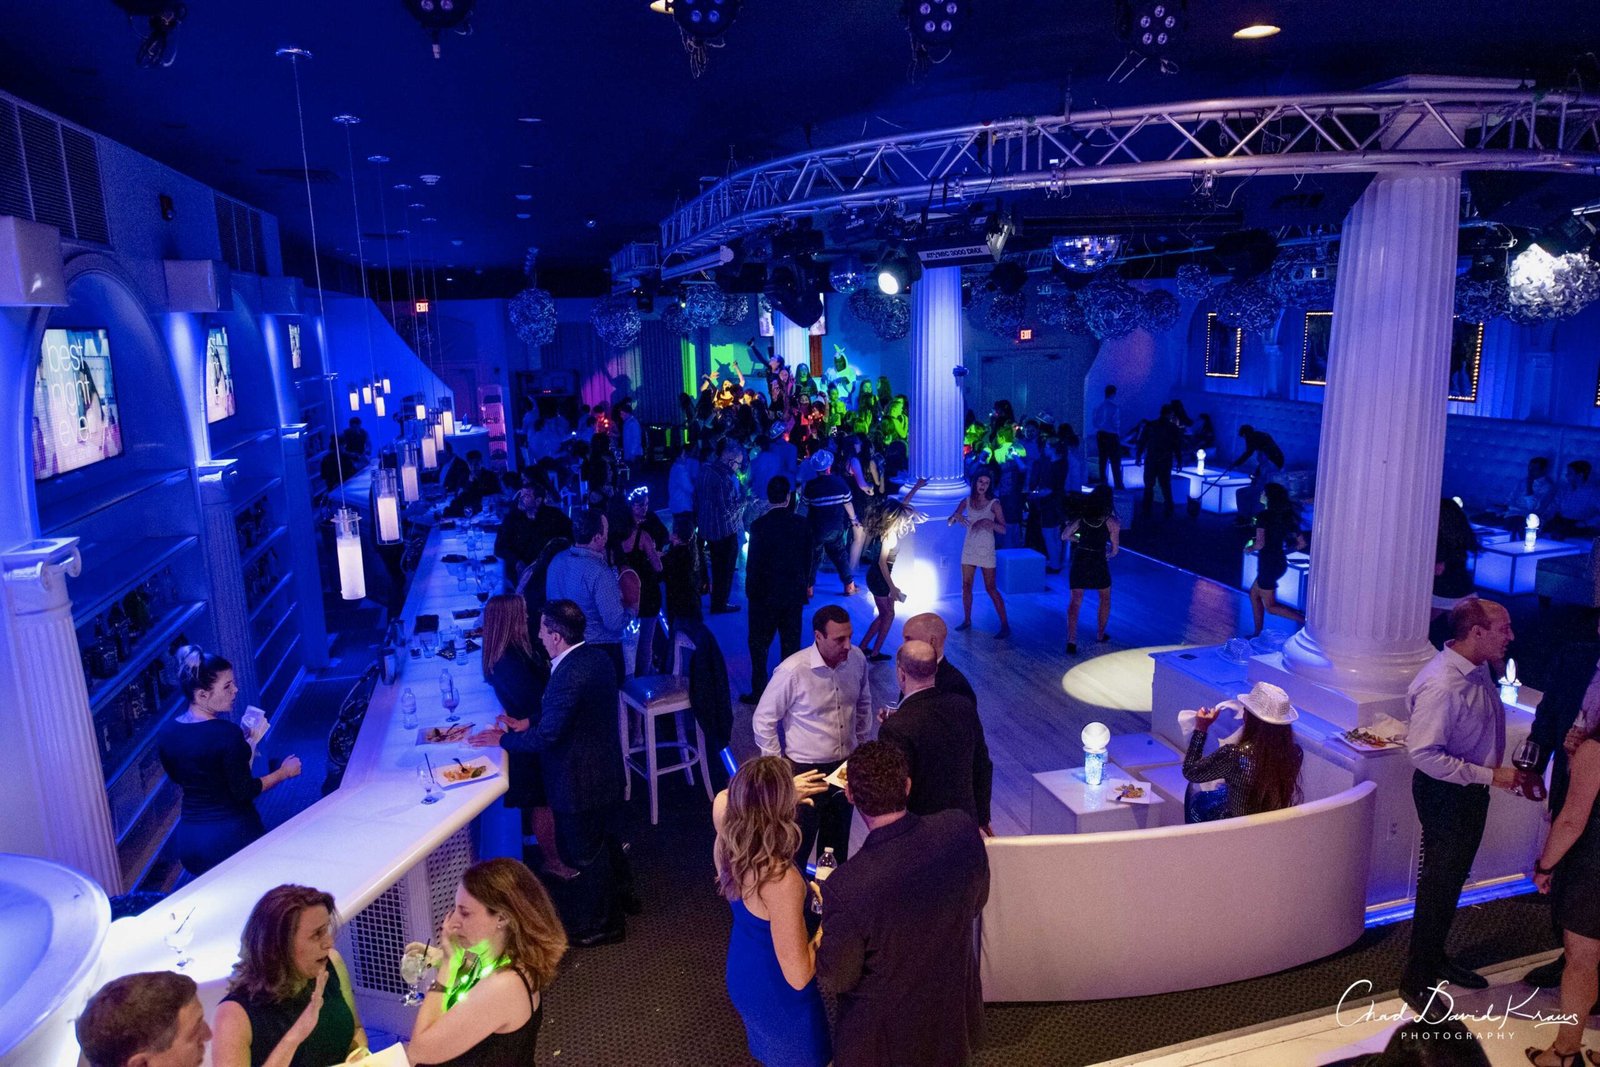 Top Reasons Why Coliseum is the Premier Night Club in White Plains